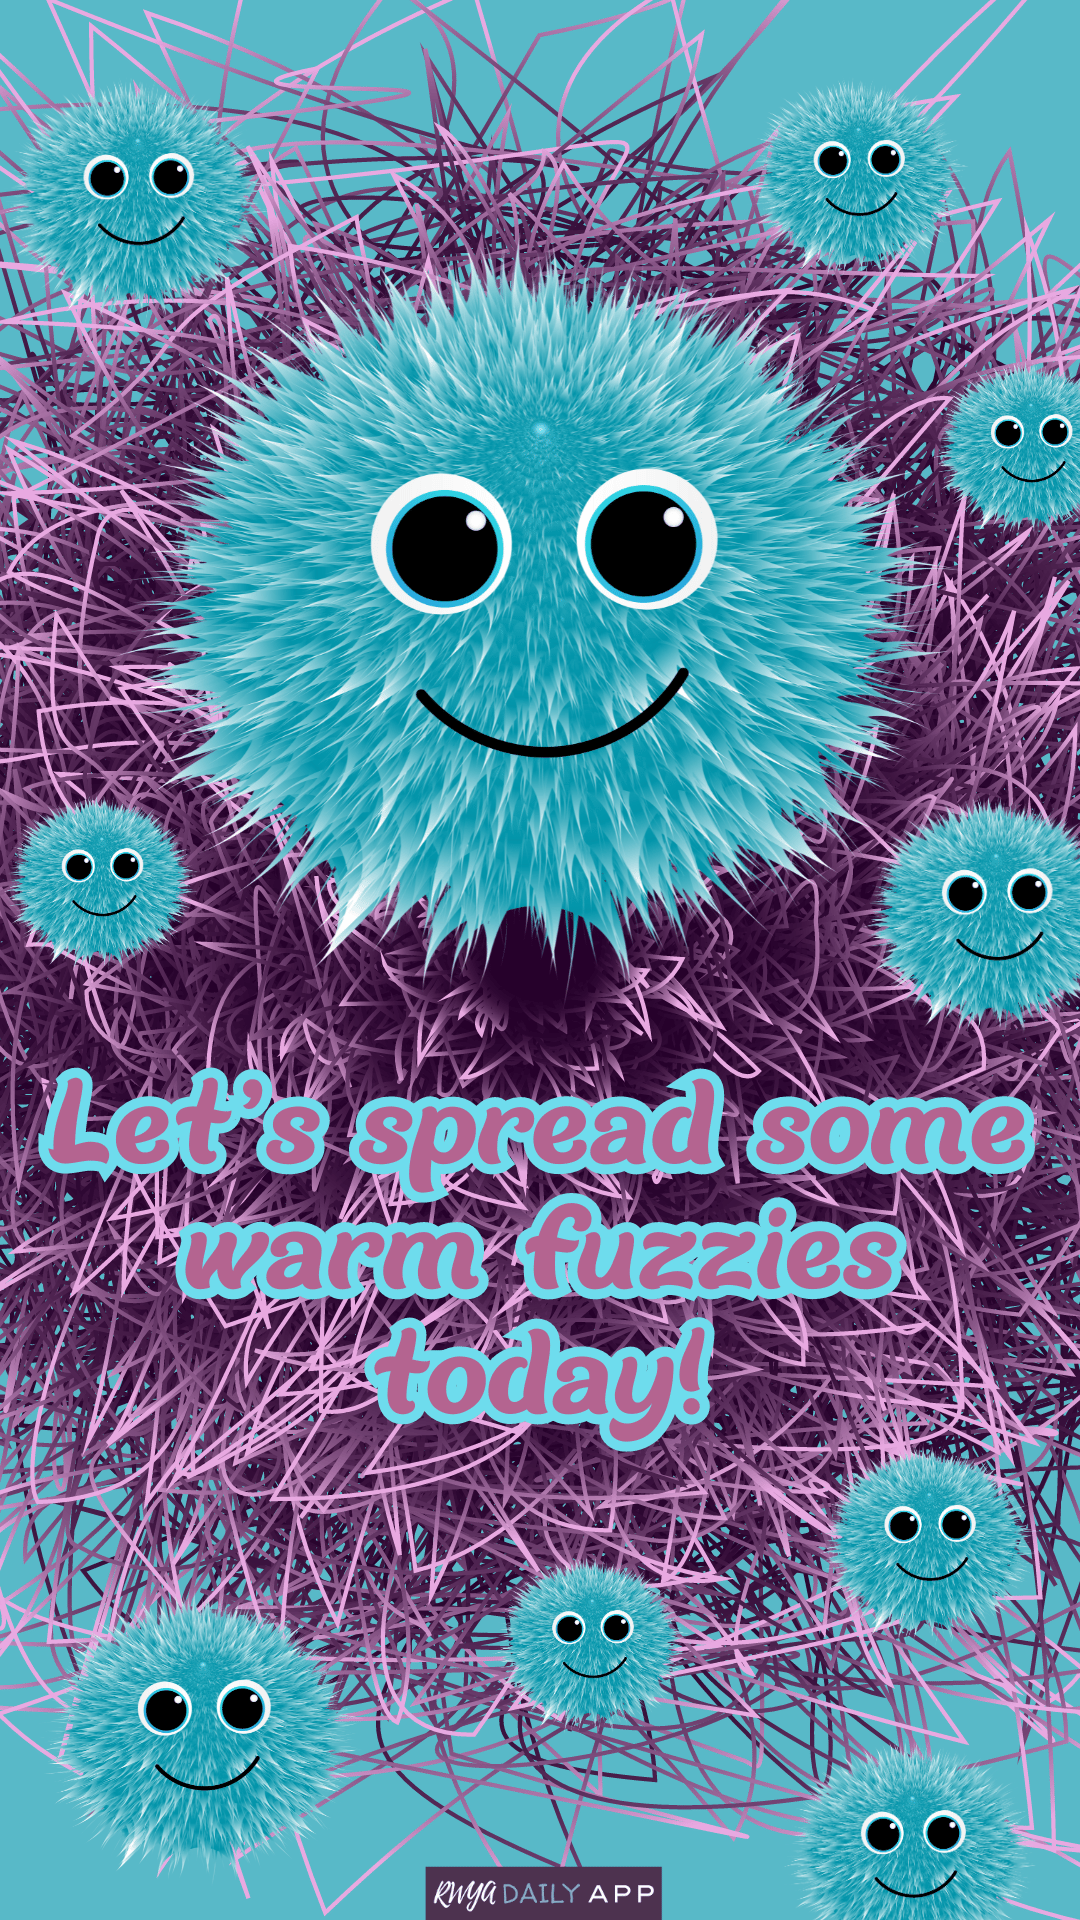 Let’s spread some warm fuzzies today!